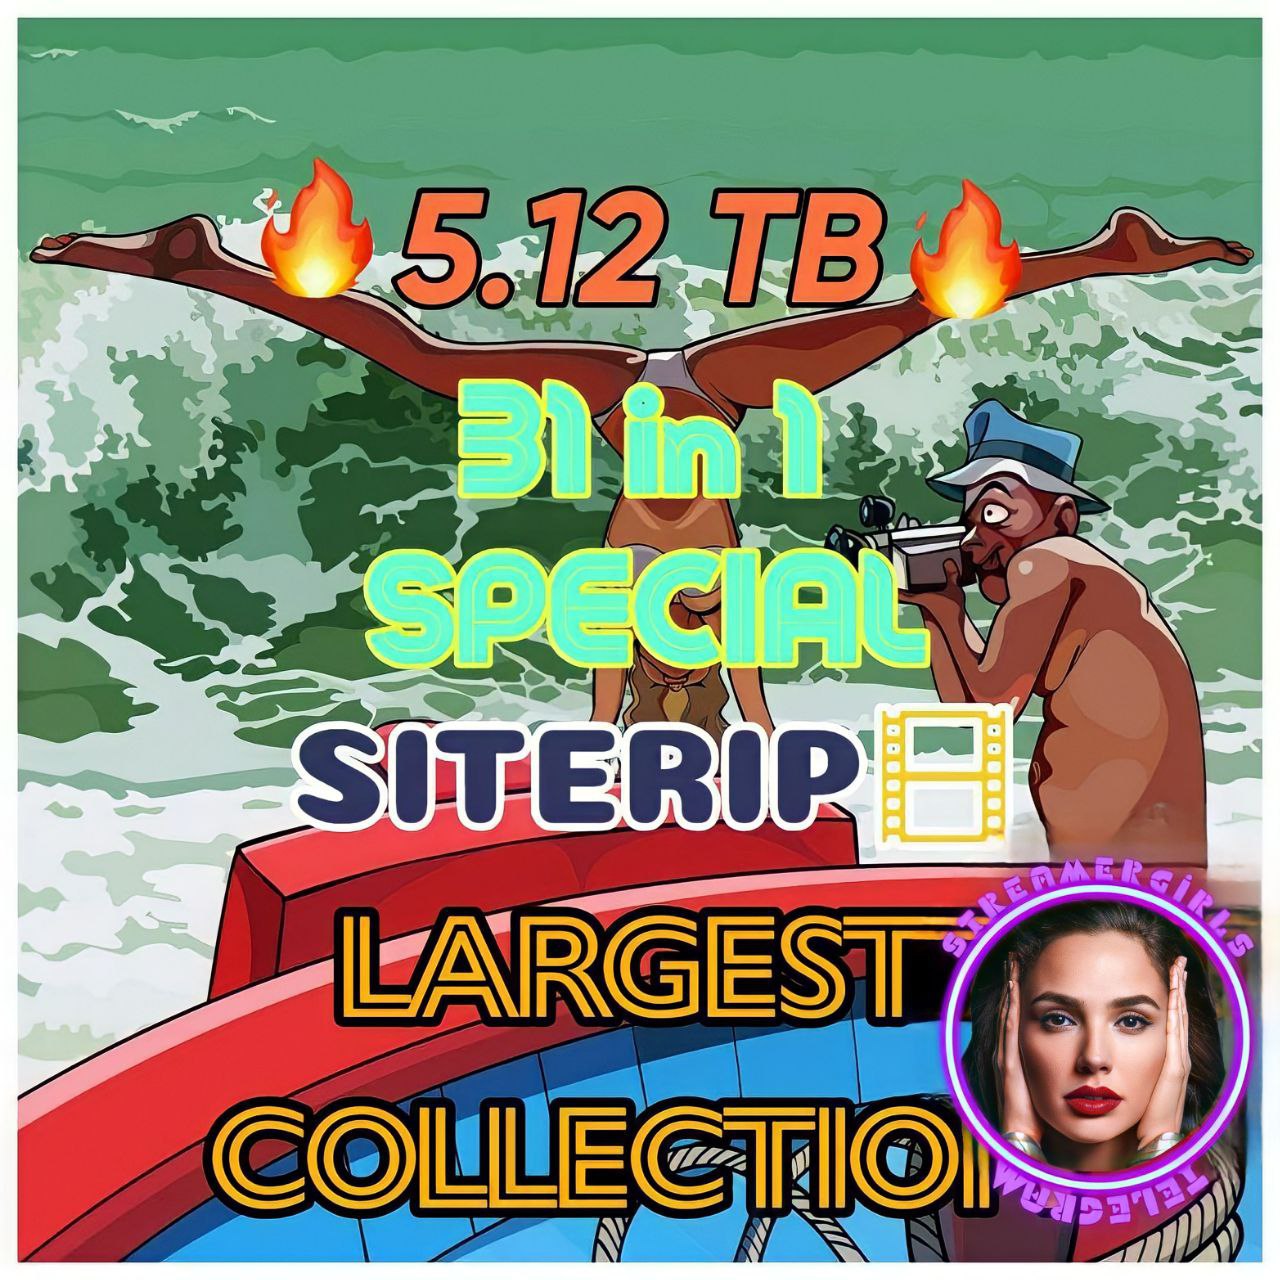 5.12 TB 31 in 1 SPECIAL S!TER!P LARGEST COLLECTION